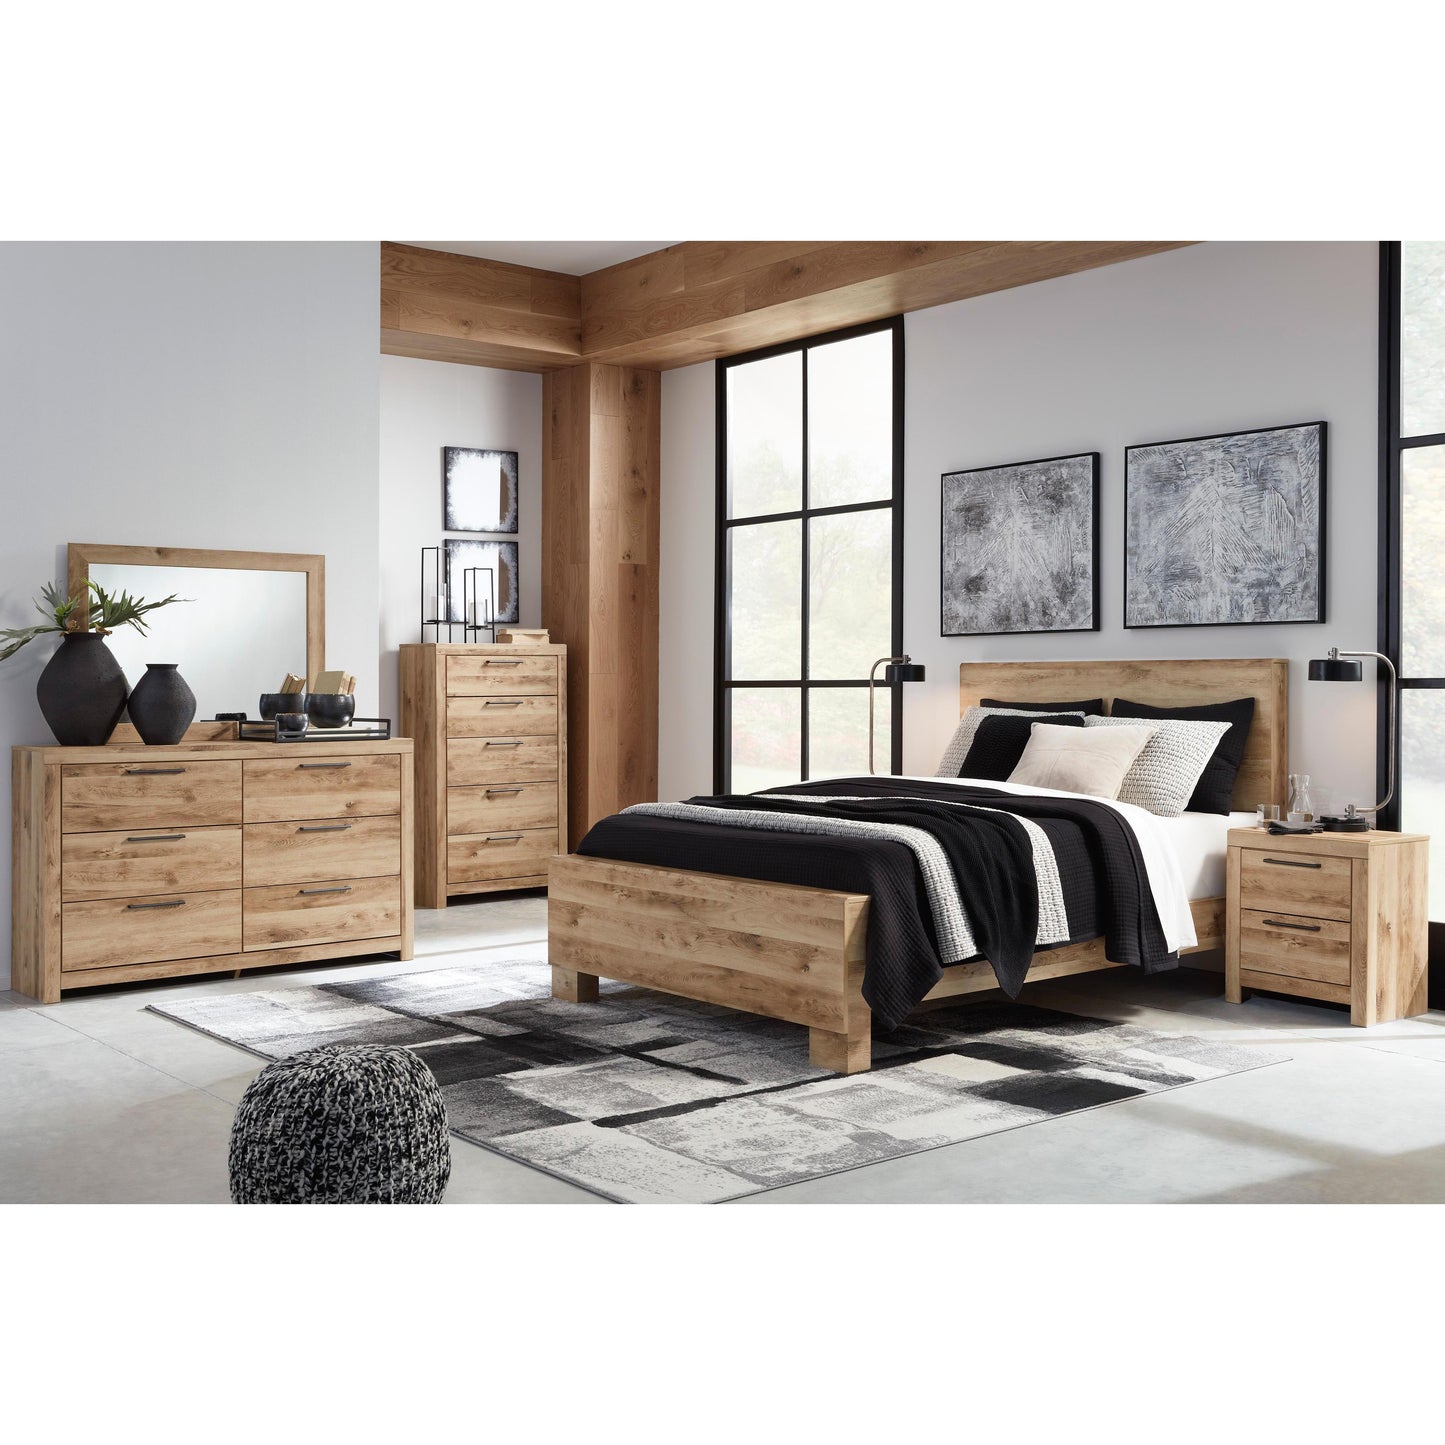 Signature Design by Ashley Hyanna B1050B14 7 pc Queen Panel Bedroom Set IMAGE 1